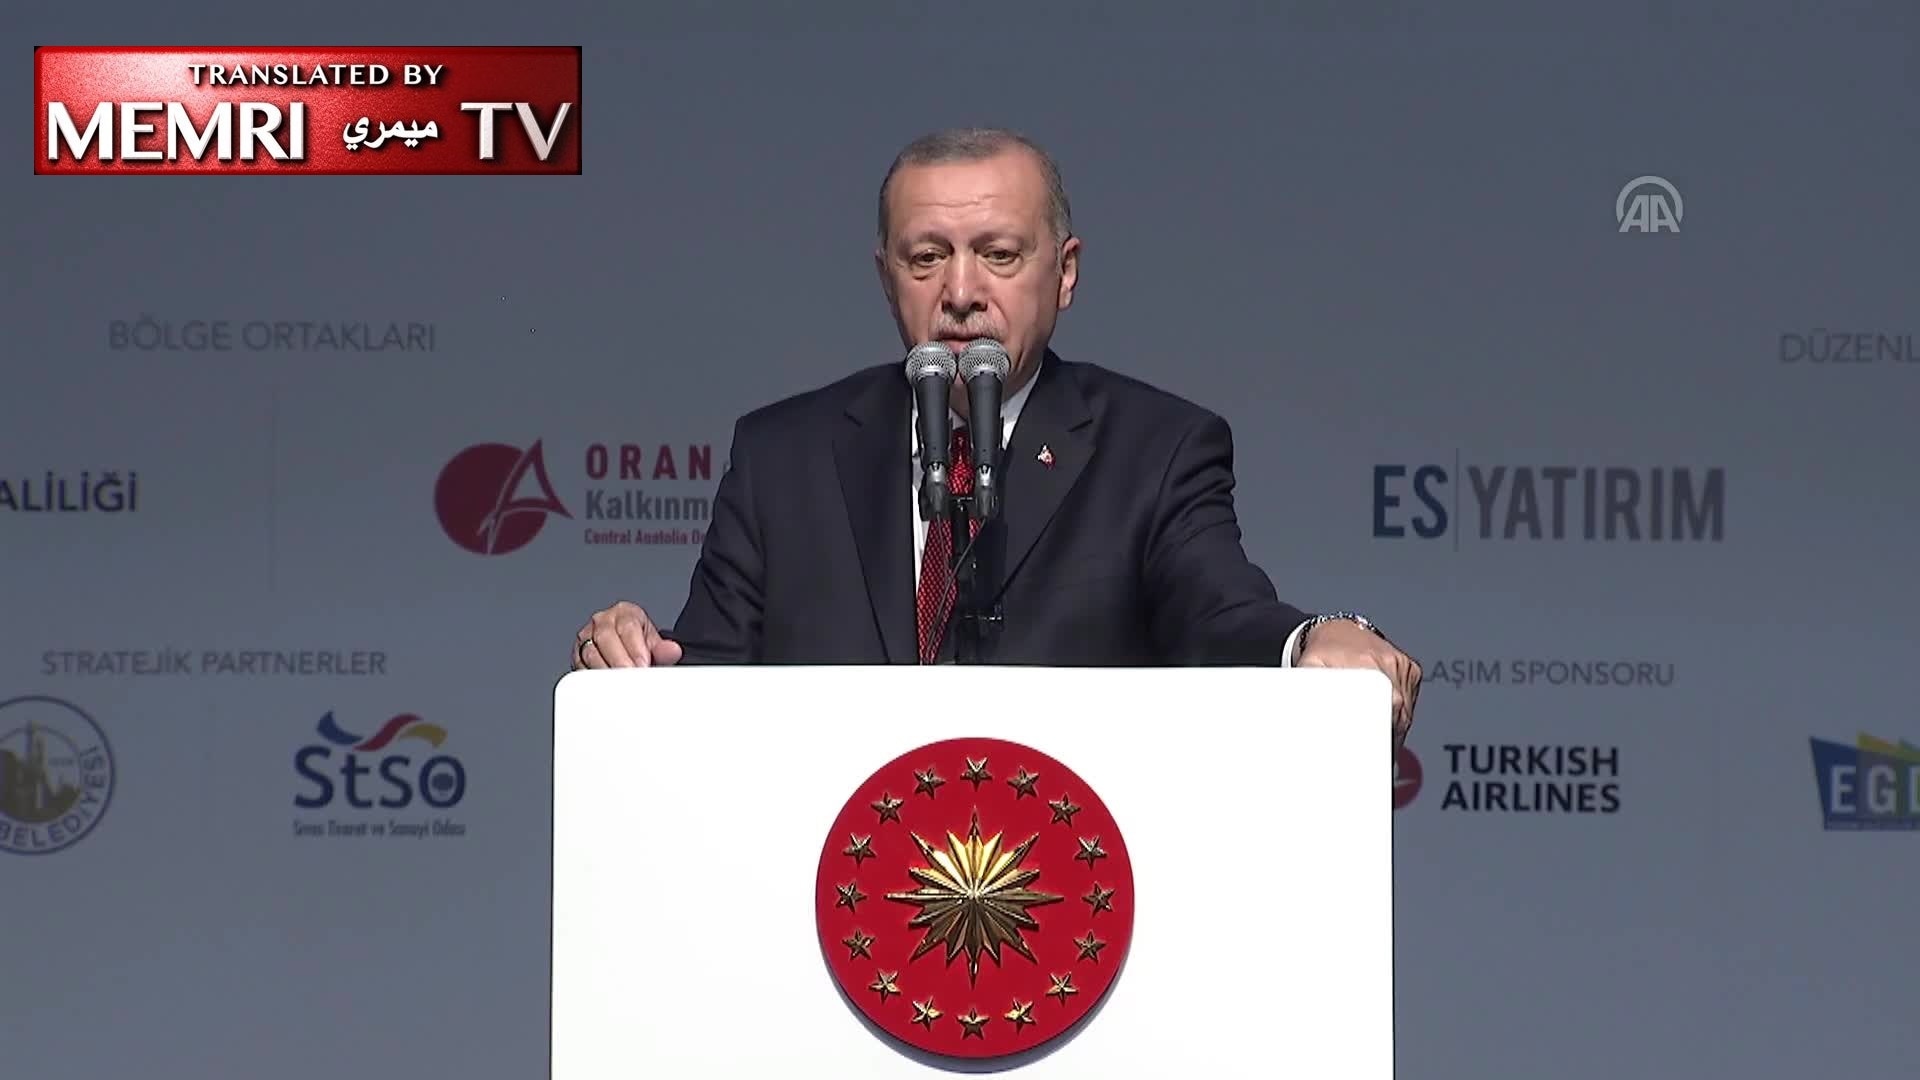 Erdoğan: I'm Not Supposed To Have Nukes? I Don't Accept That | MEMRI